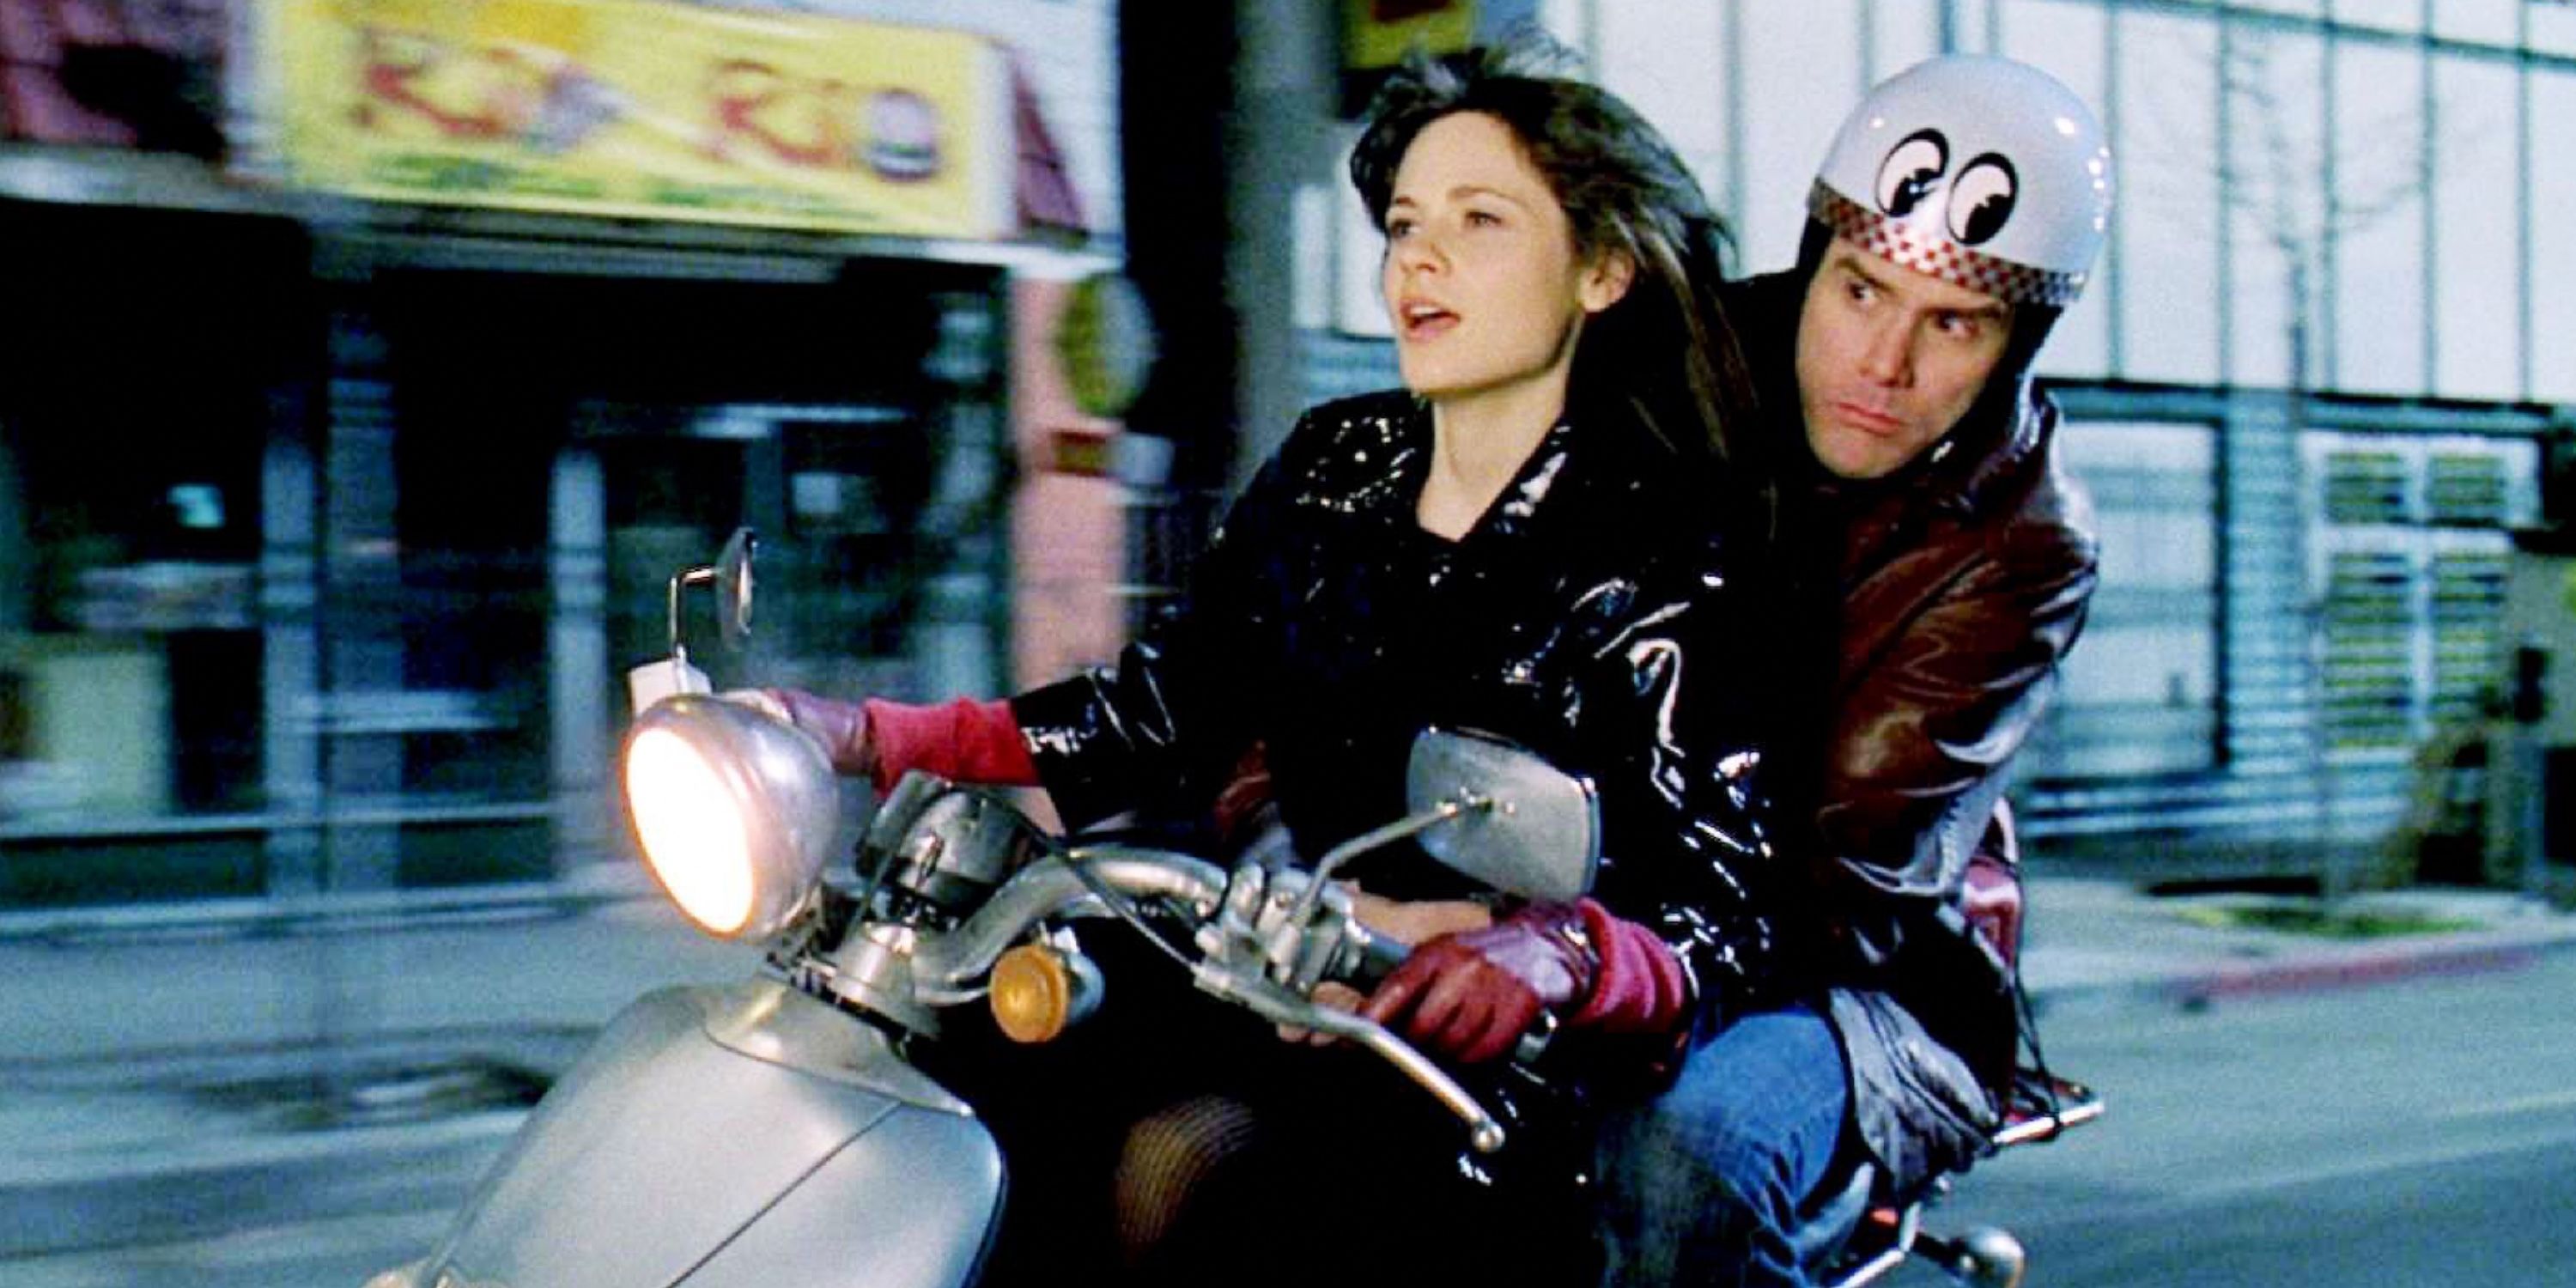 Zooey Deschanel and Jim Carrey ride a motorcycle in Yes Man